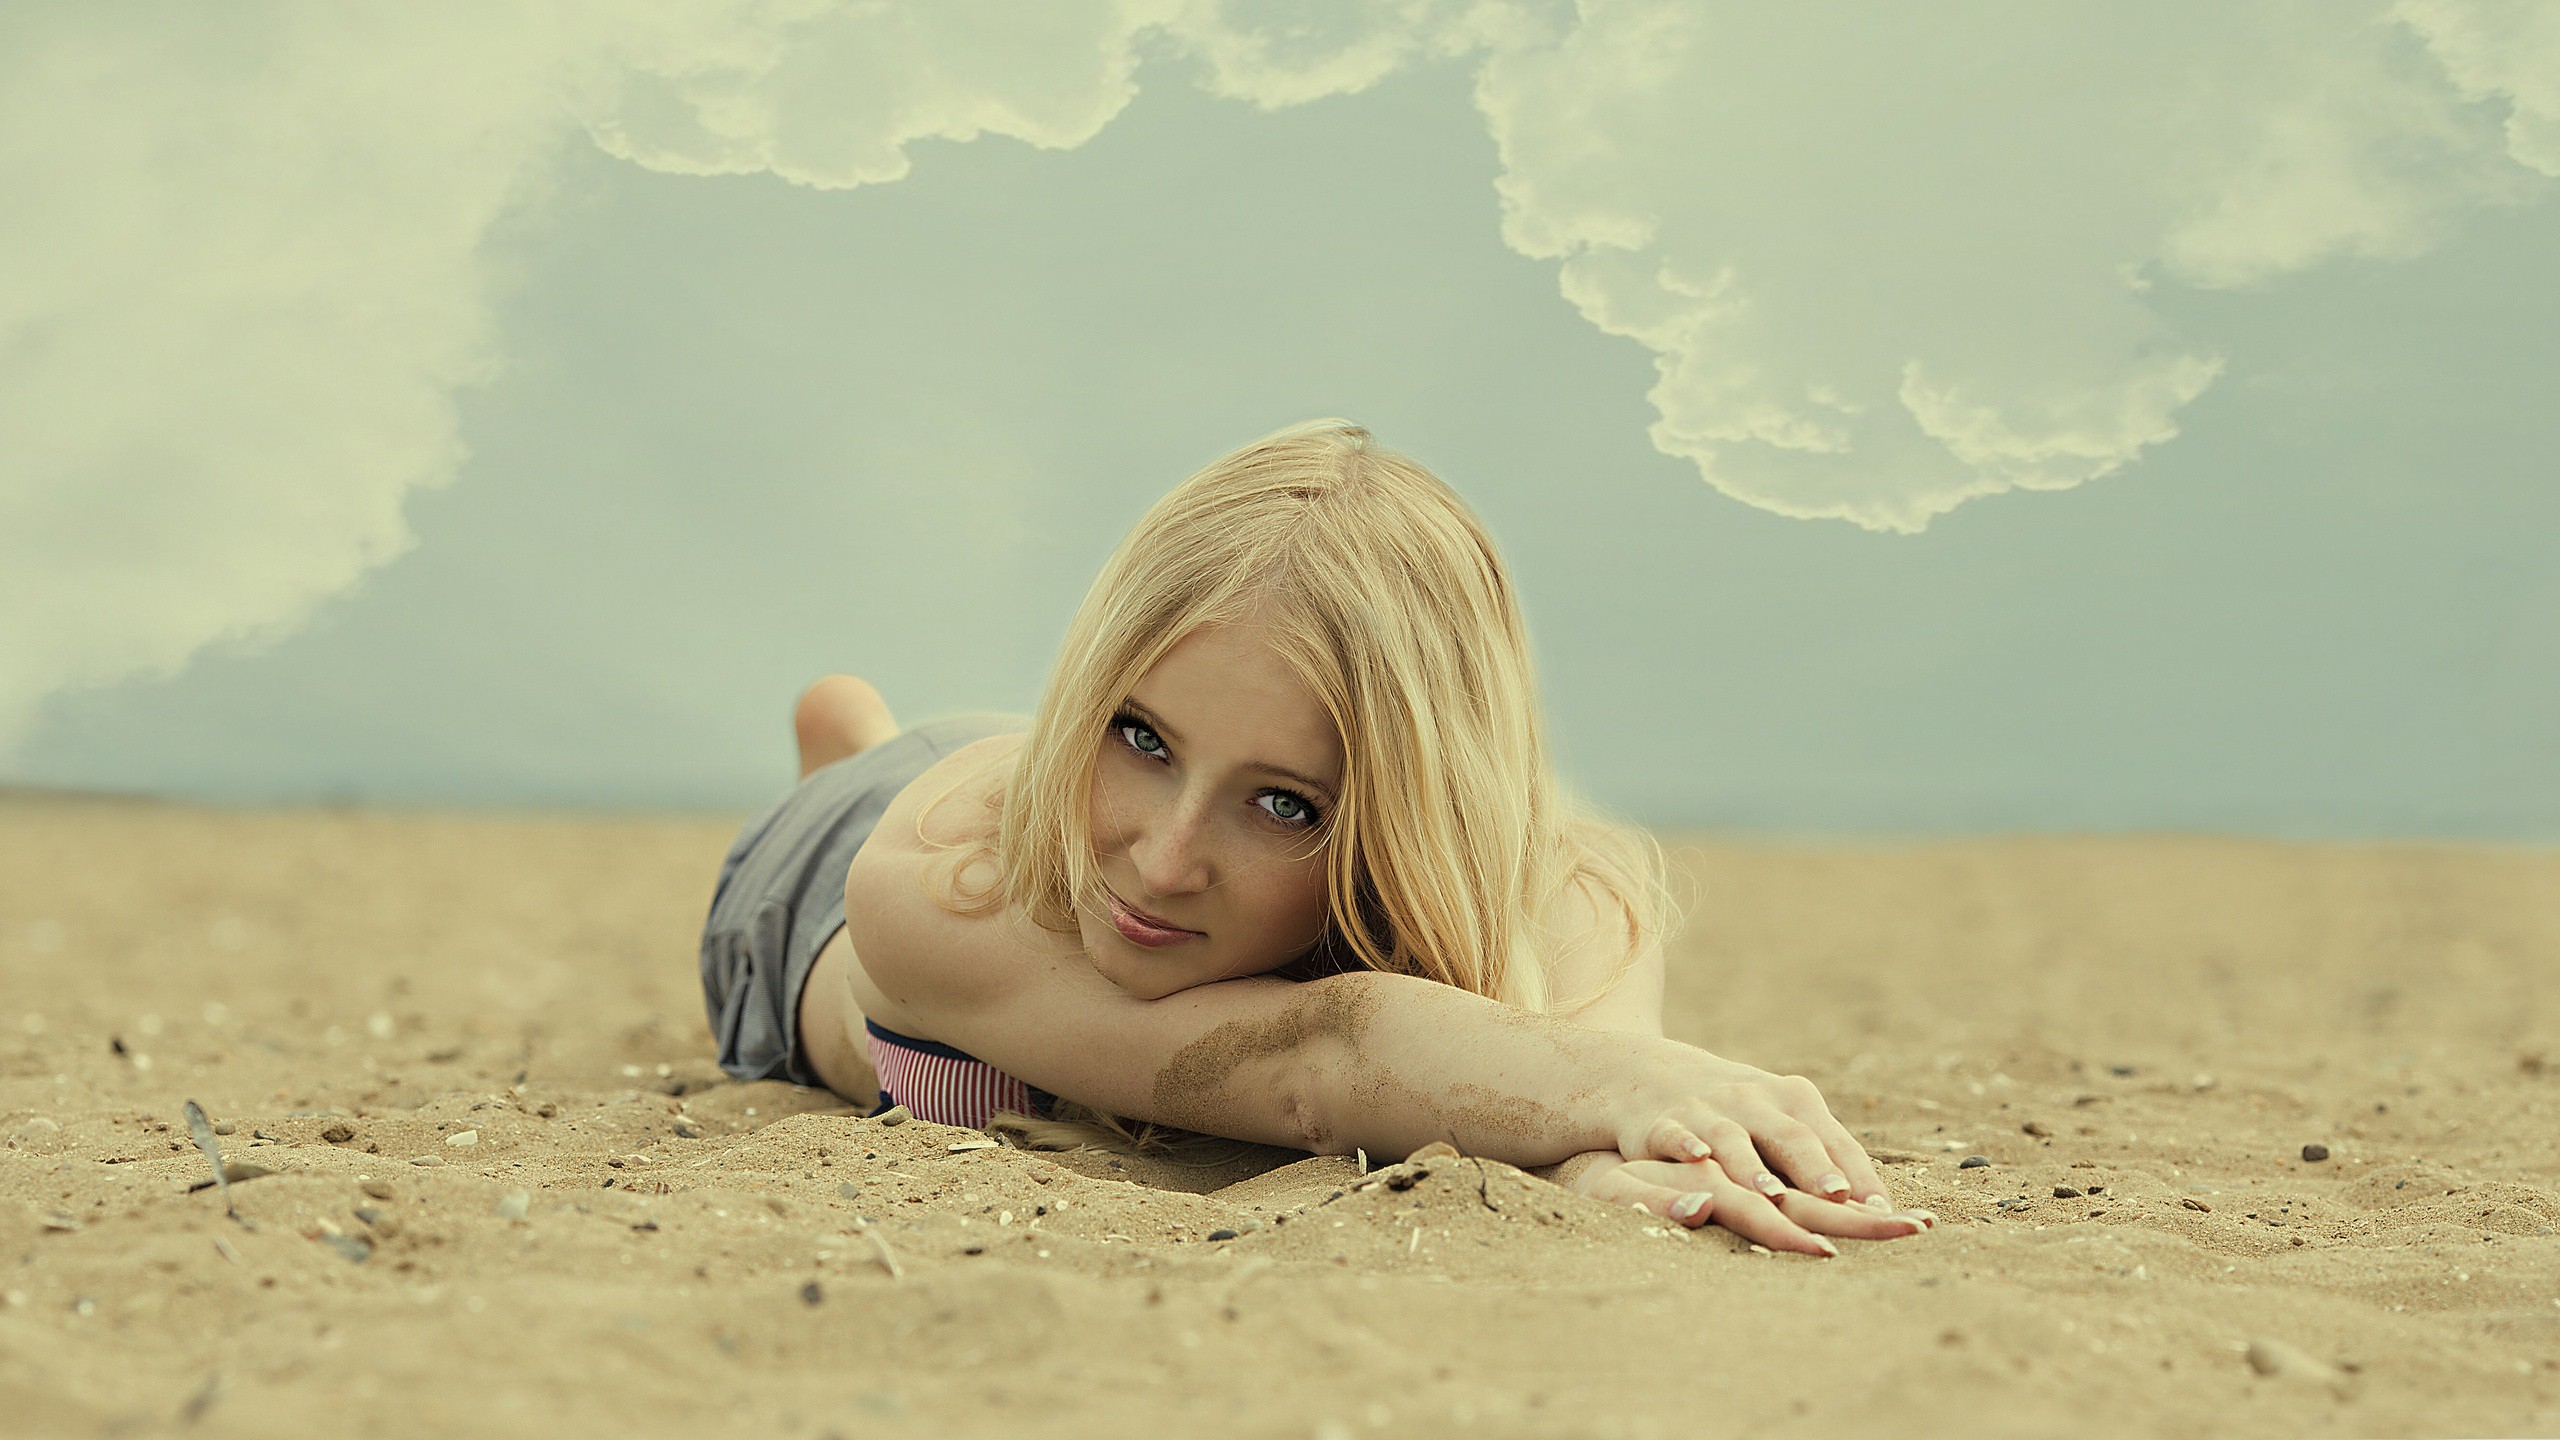 Women Model Blonde Sand Clouds Sand Covered 2560x1440